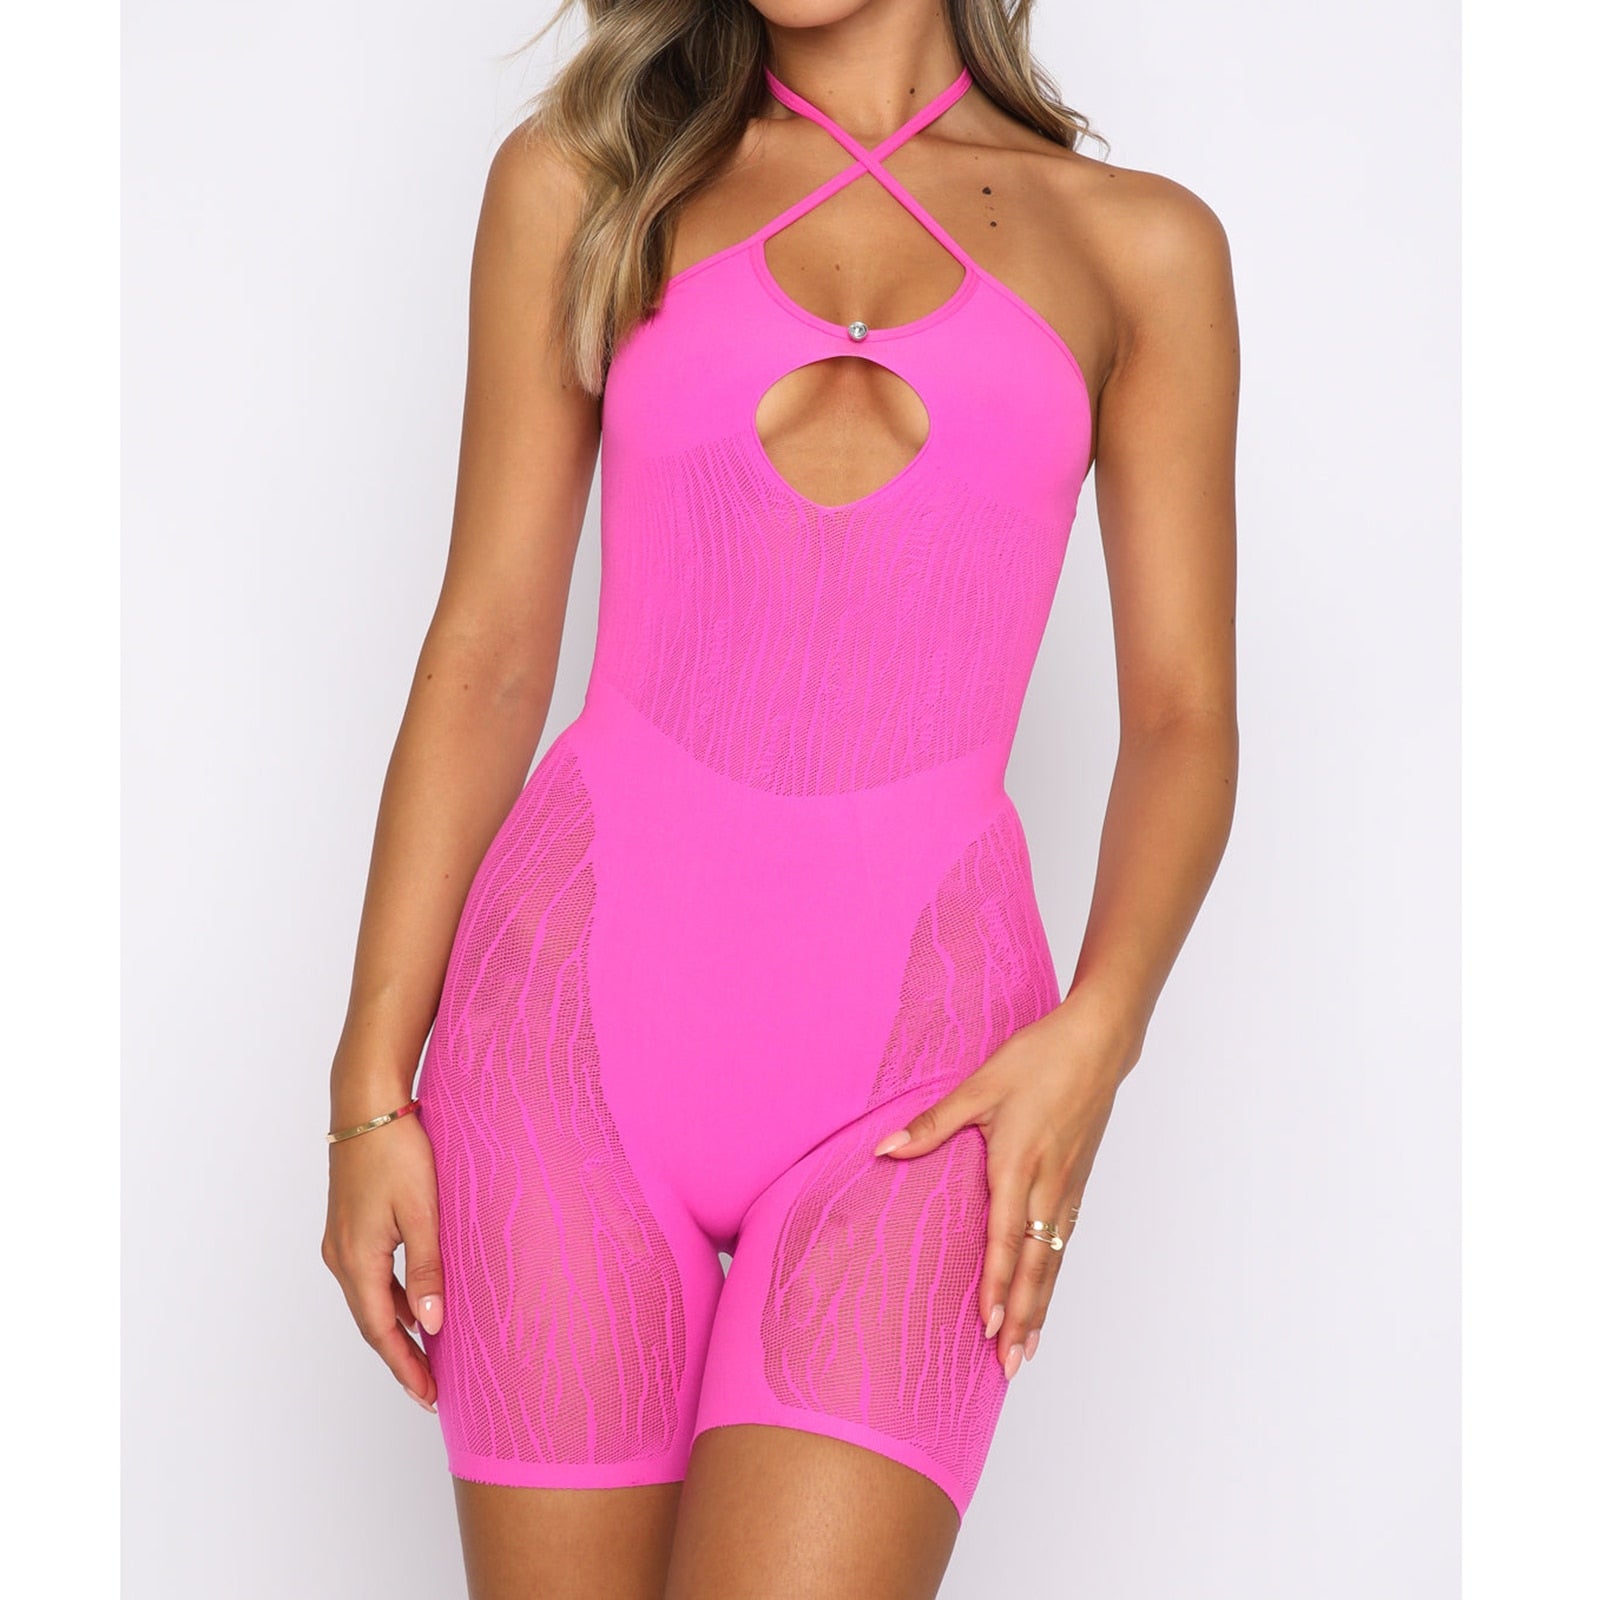 Cinessd  2022 Summer Playsuits Women  Sleeveless Cut Out Mesh Sheer Bodycon Romper Biker Fitness Club Sexy Jumpsuit Overalls Female